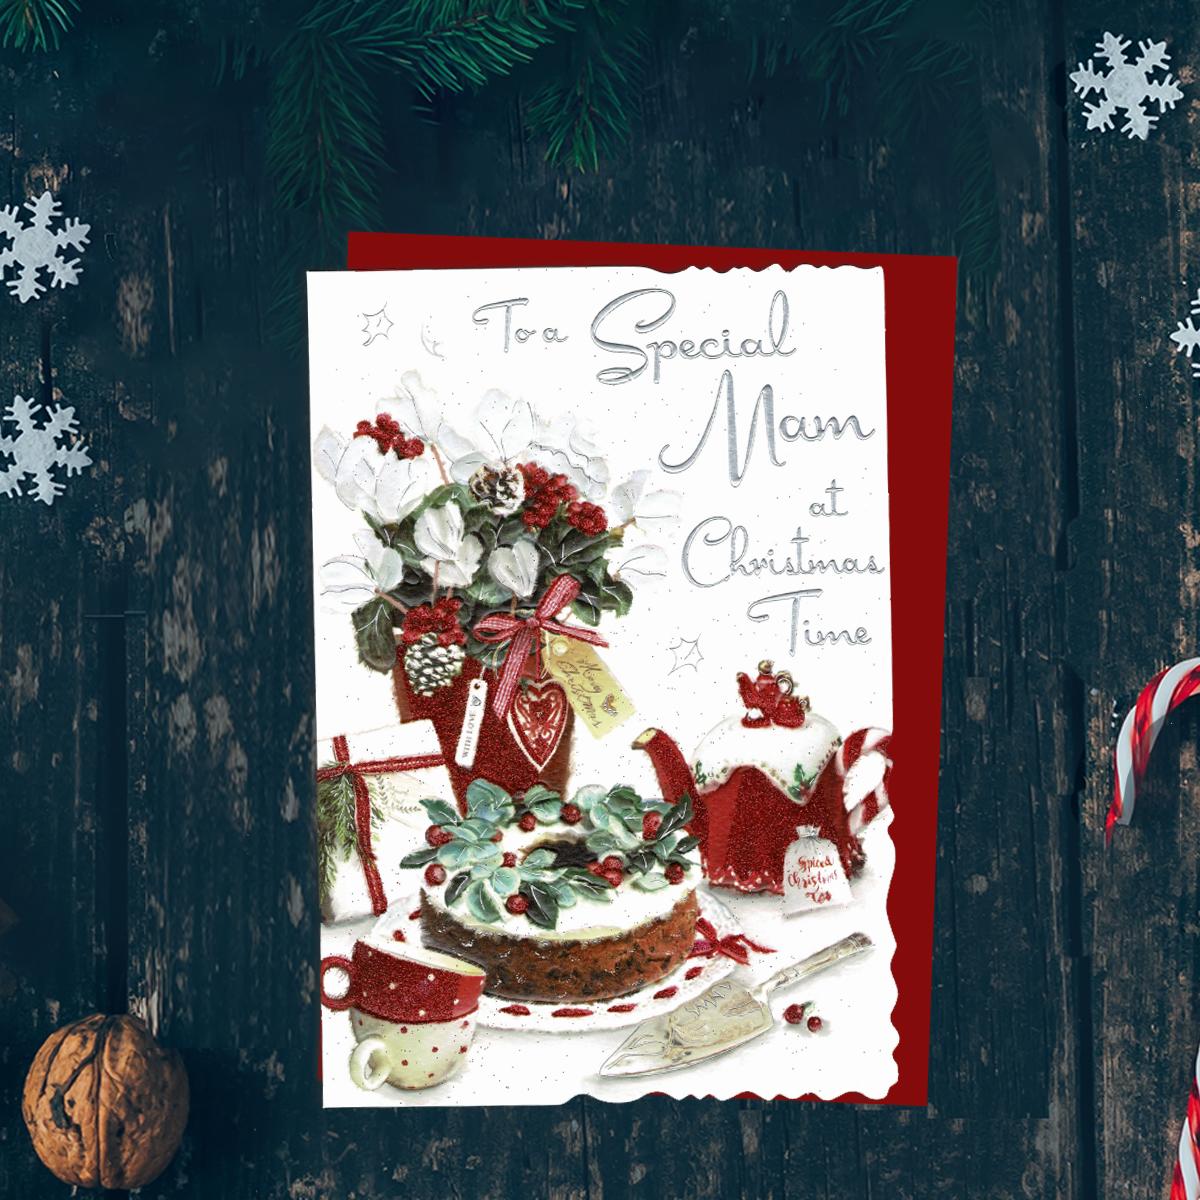 To A Special Mam At Christmas Time Featuring Flowers, Christmas Cake And Tea. Finished With silver Foil Lettering, Red Glitter And Red Envelope